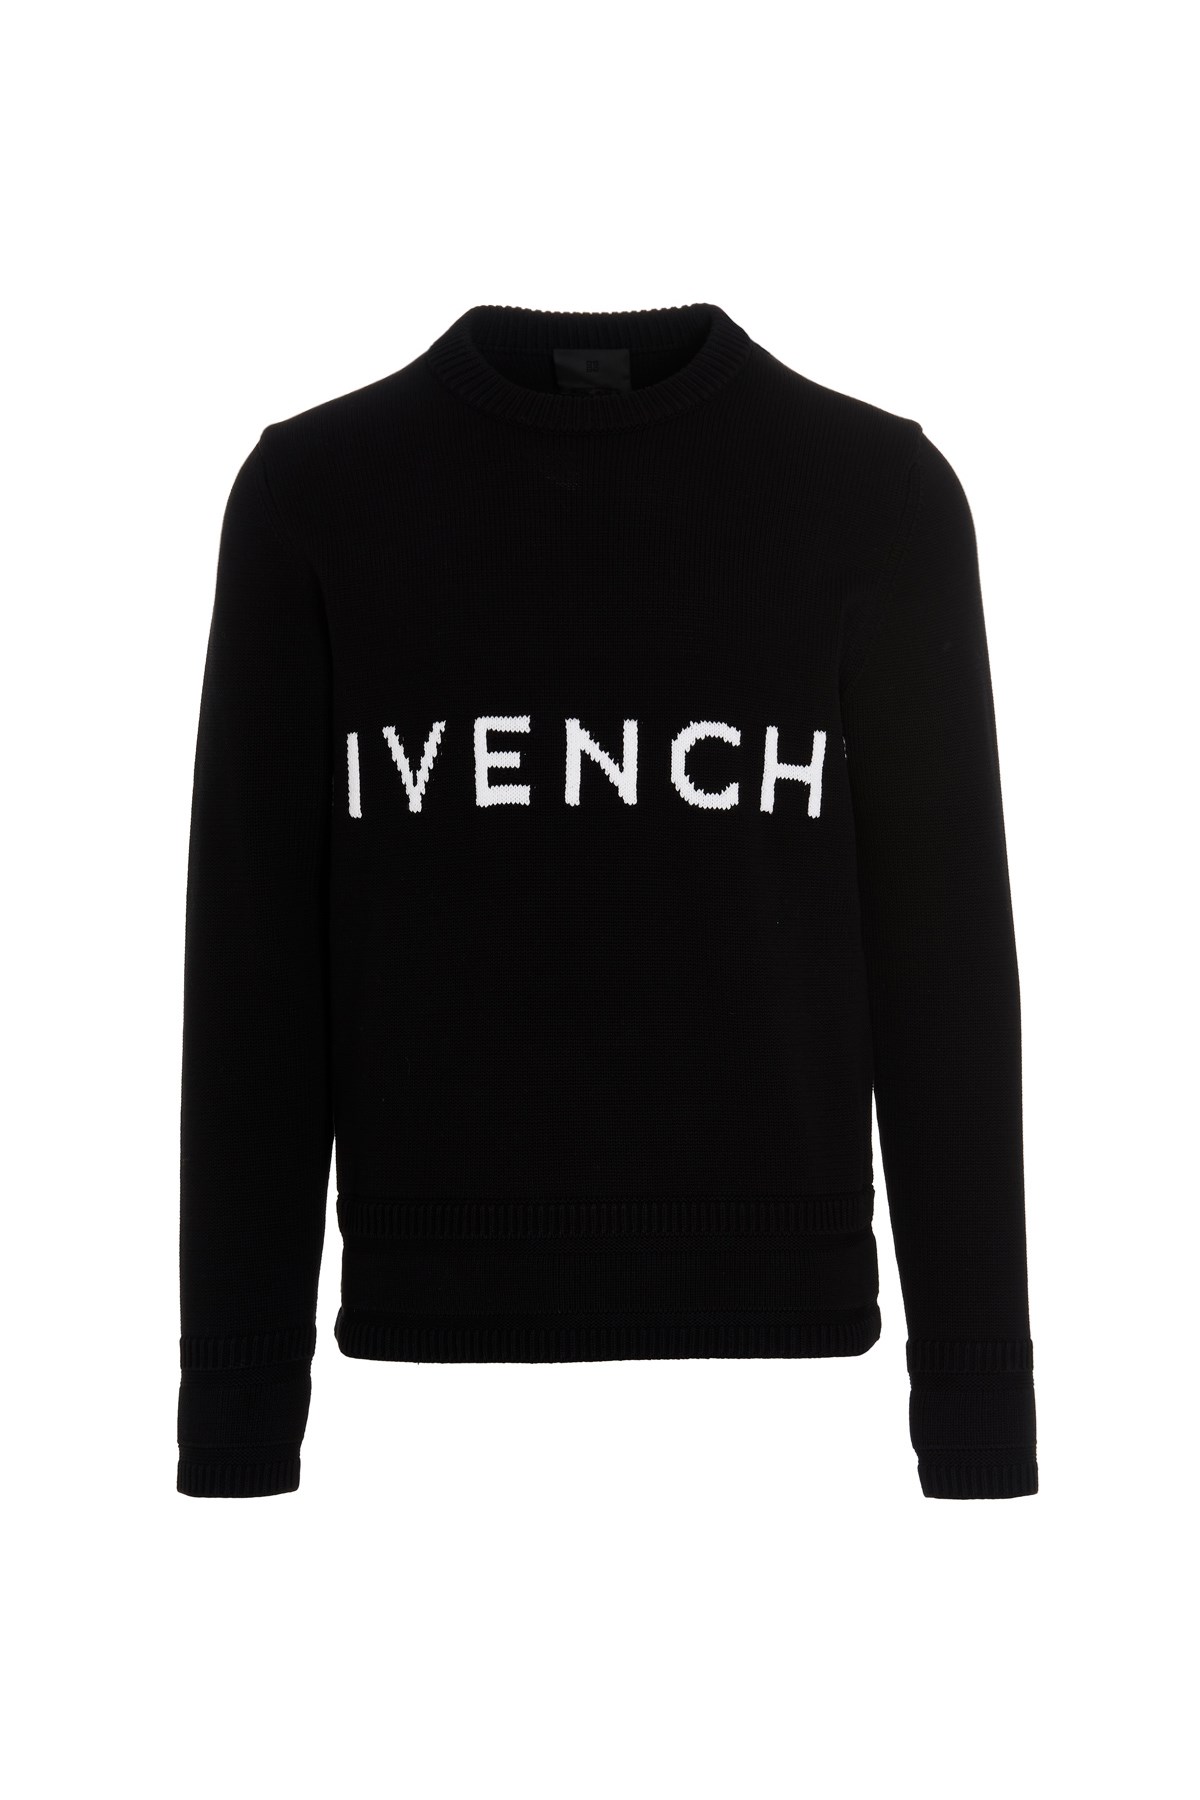 GIVENCHY Pullover Mit Logo-Intarsienmuster